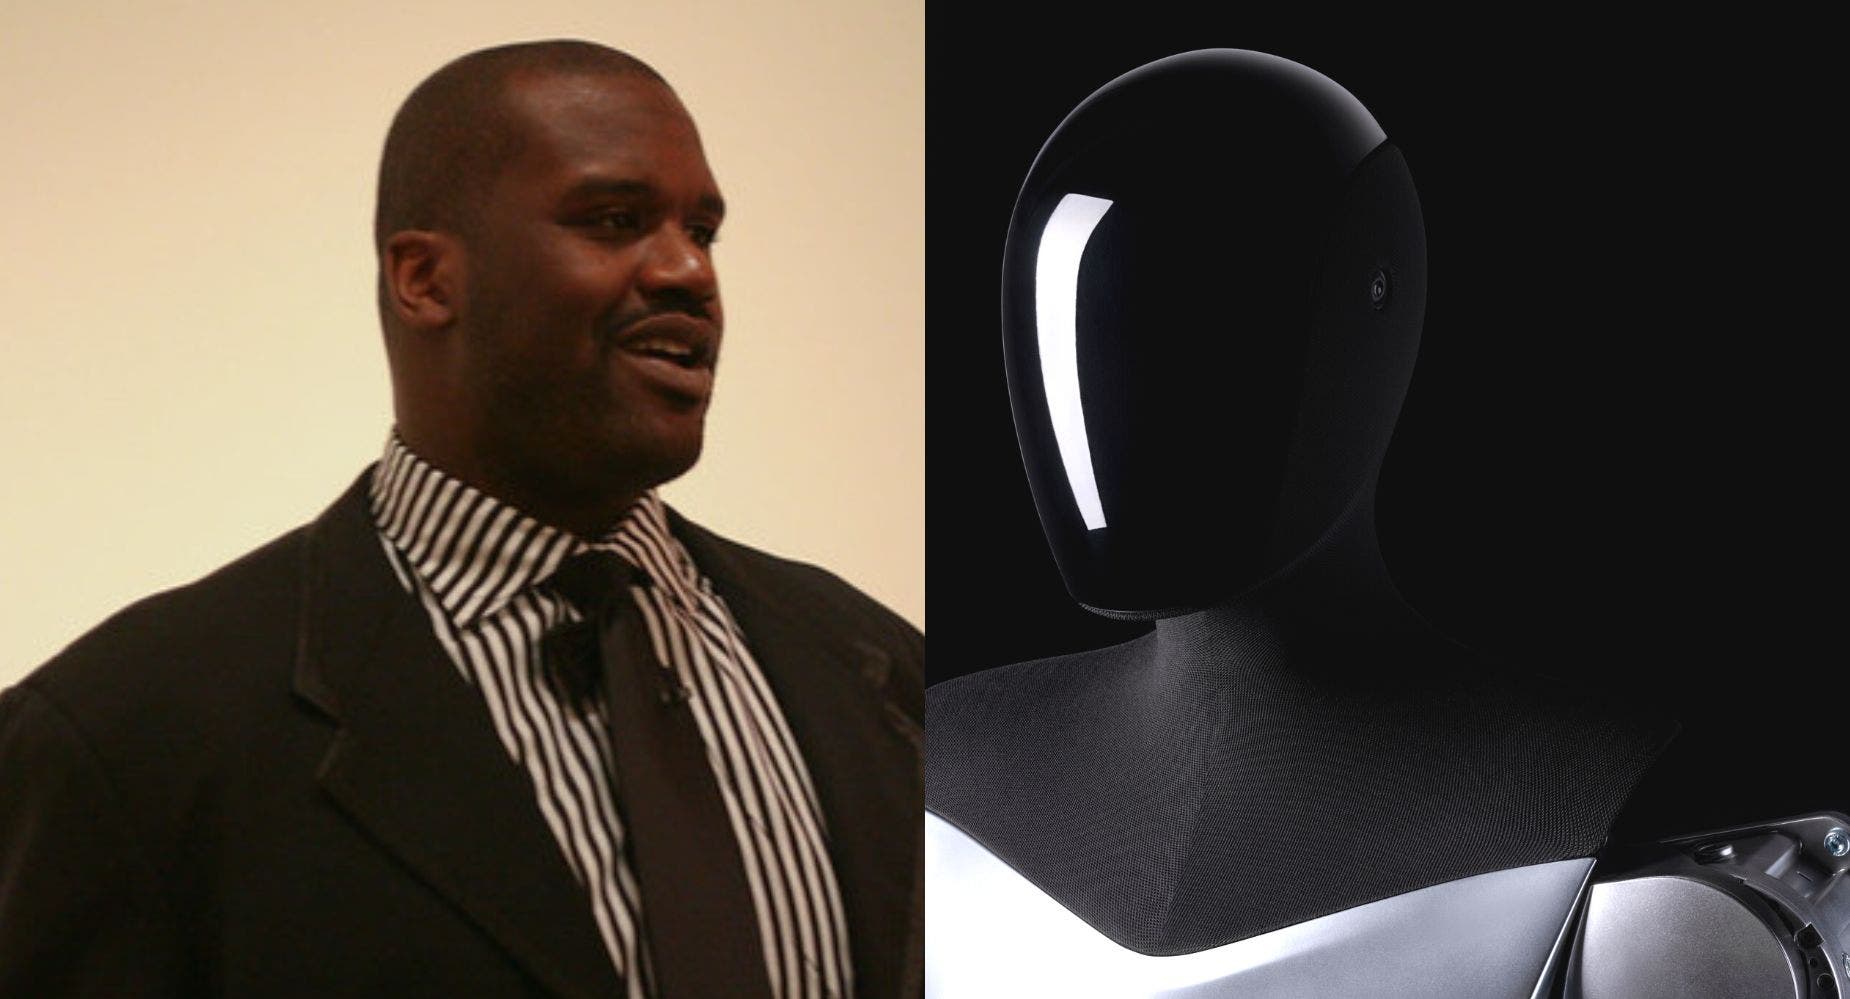 'Can I Purchase A Robot': NBA Hall of Famer Wants A Tesla Bot, Will Elon Musk Help Him Out?